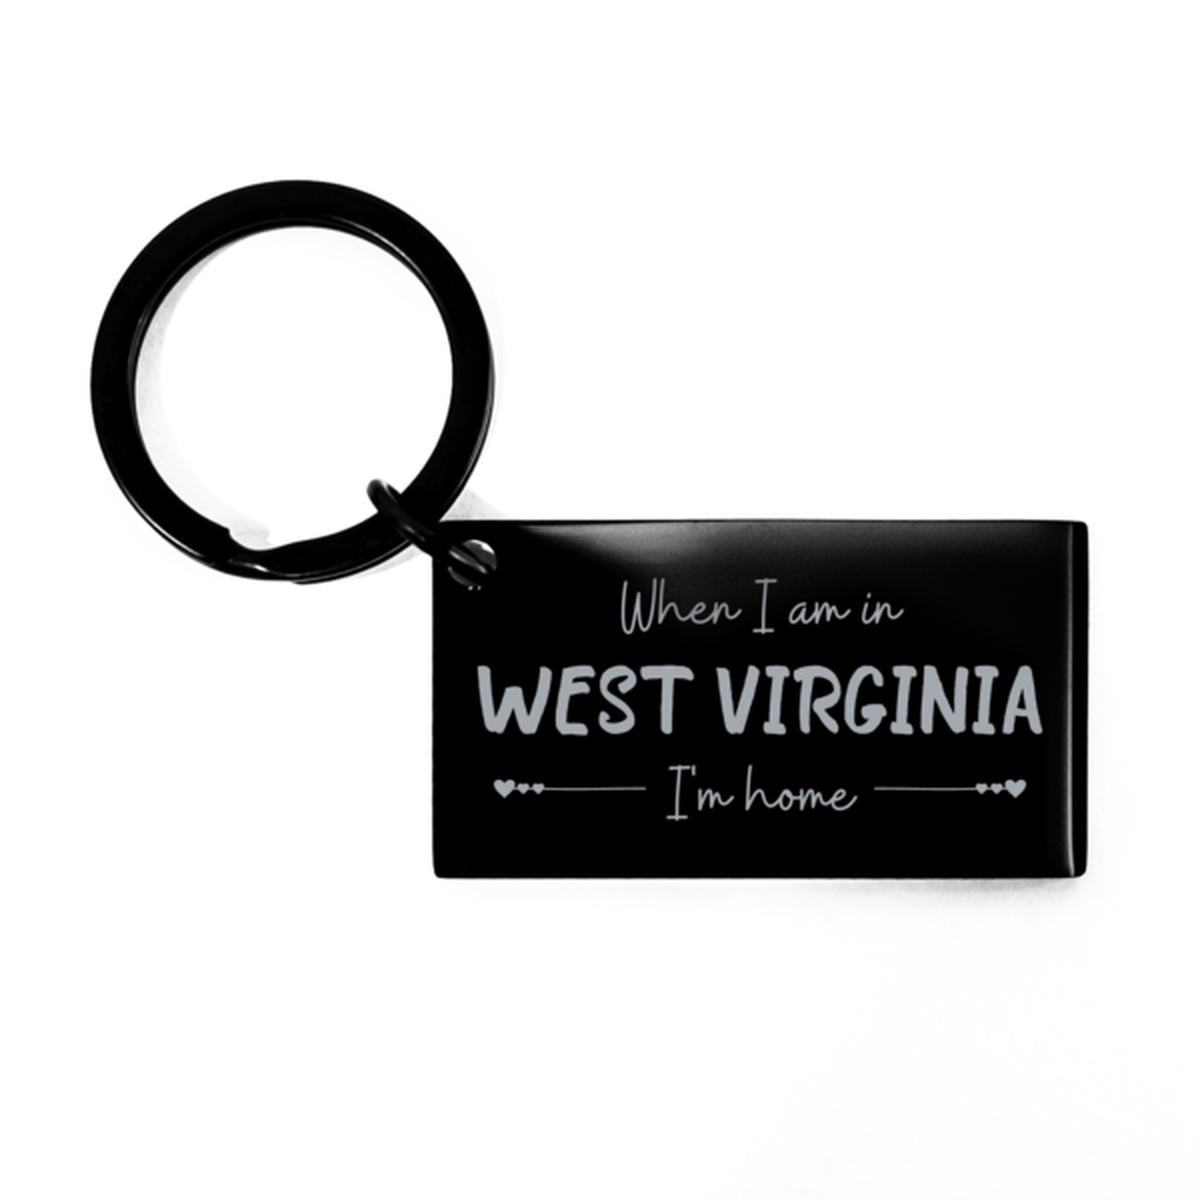 When I am in West Virginia I'm home Keychain, Cheap Gifts For West Virginia, State West Virginia Birthday Gifts for Friends Coworker